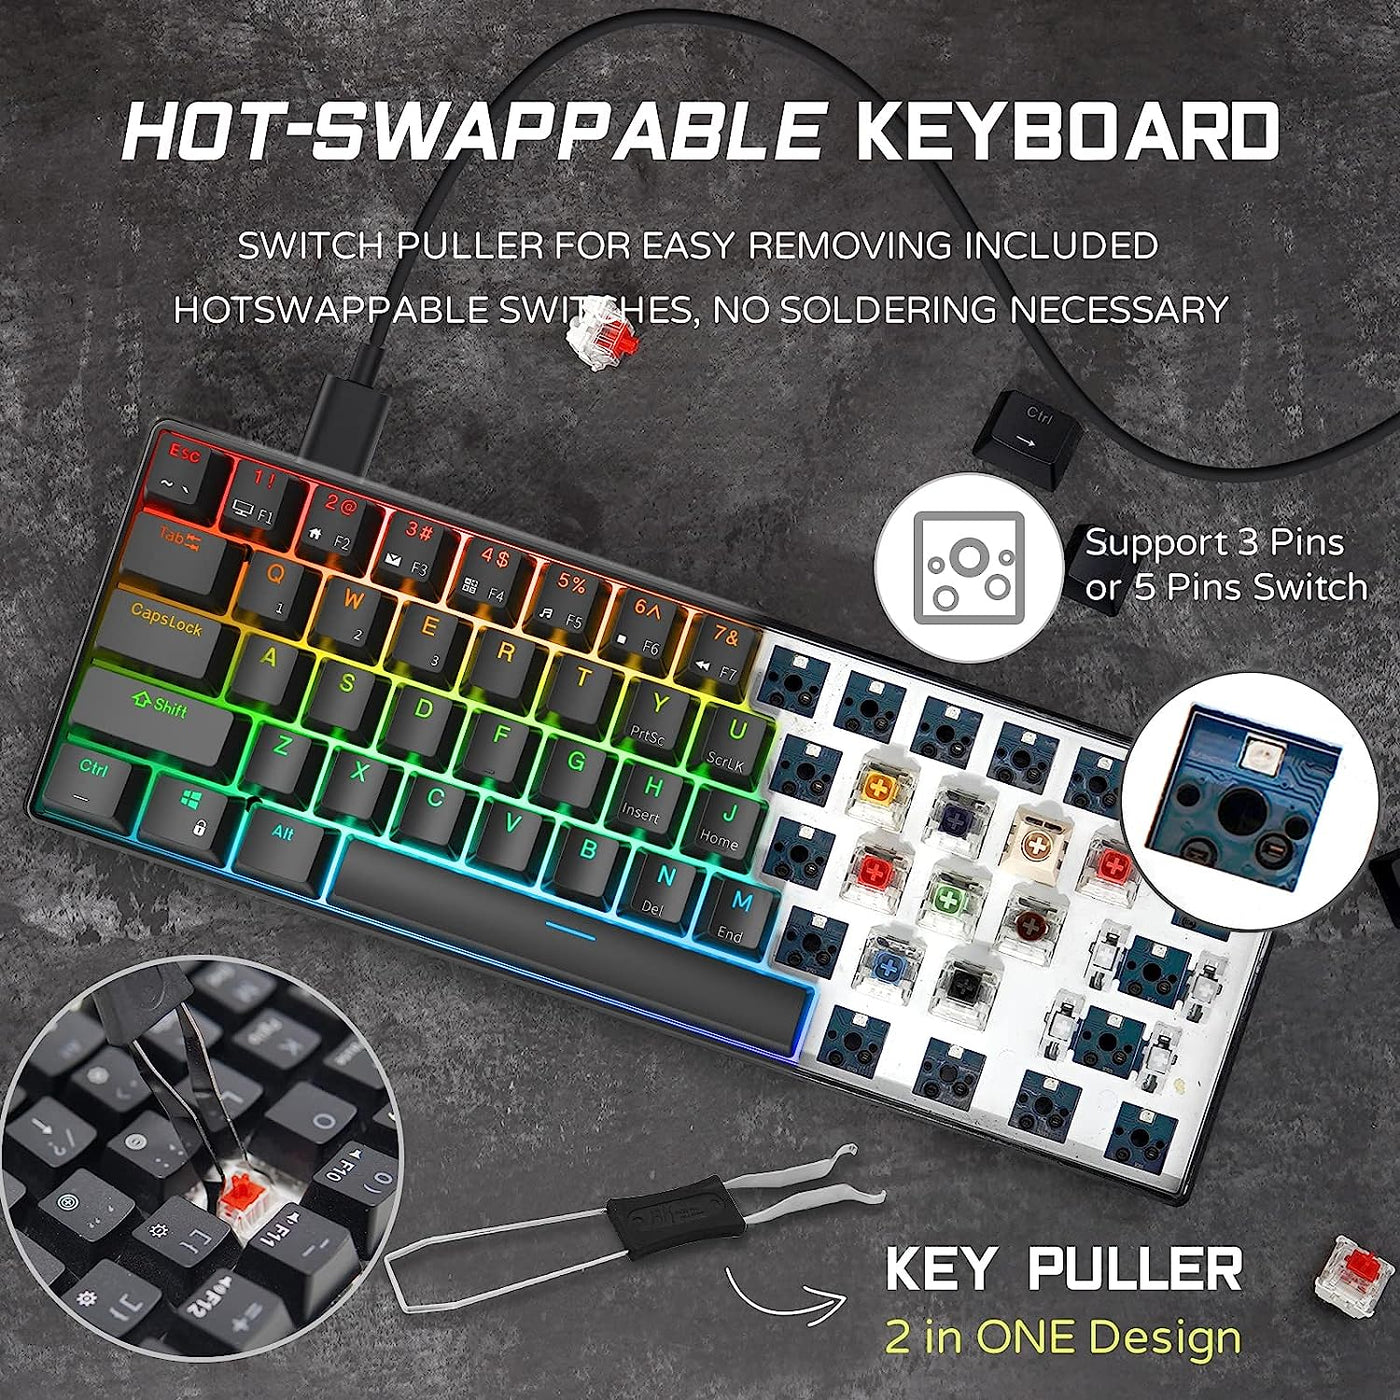 RK ROYAL KLUDGE RK61 Wired 60% Mechanical Gaming Keyboard RGB Backlit Ultra-Compact Hot Swappable Red Switch Black